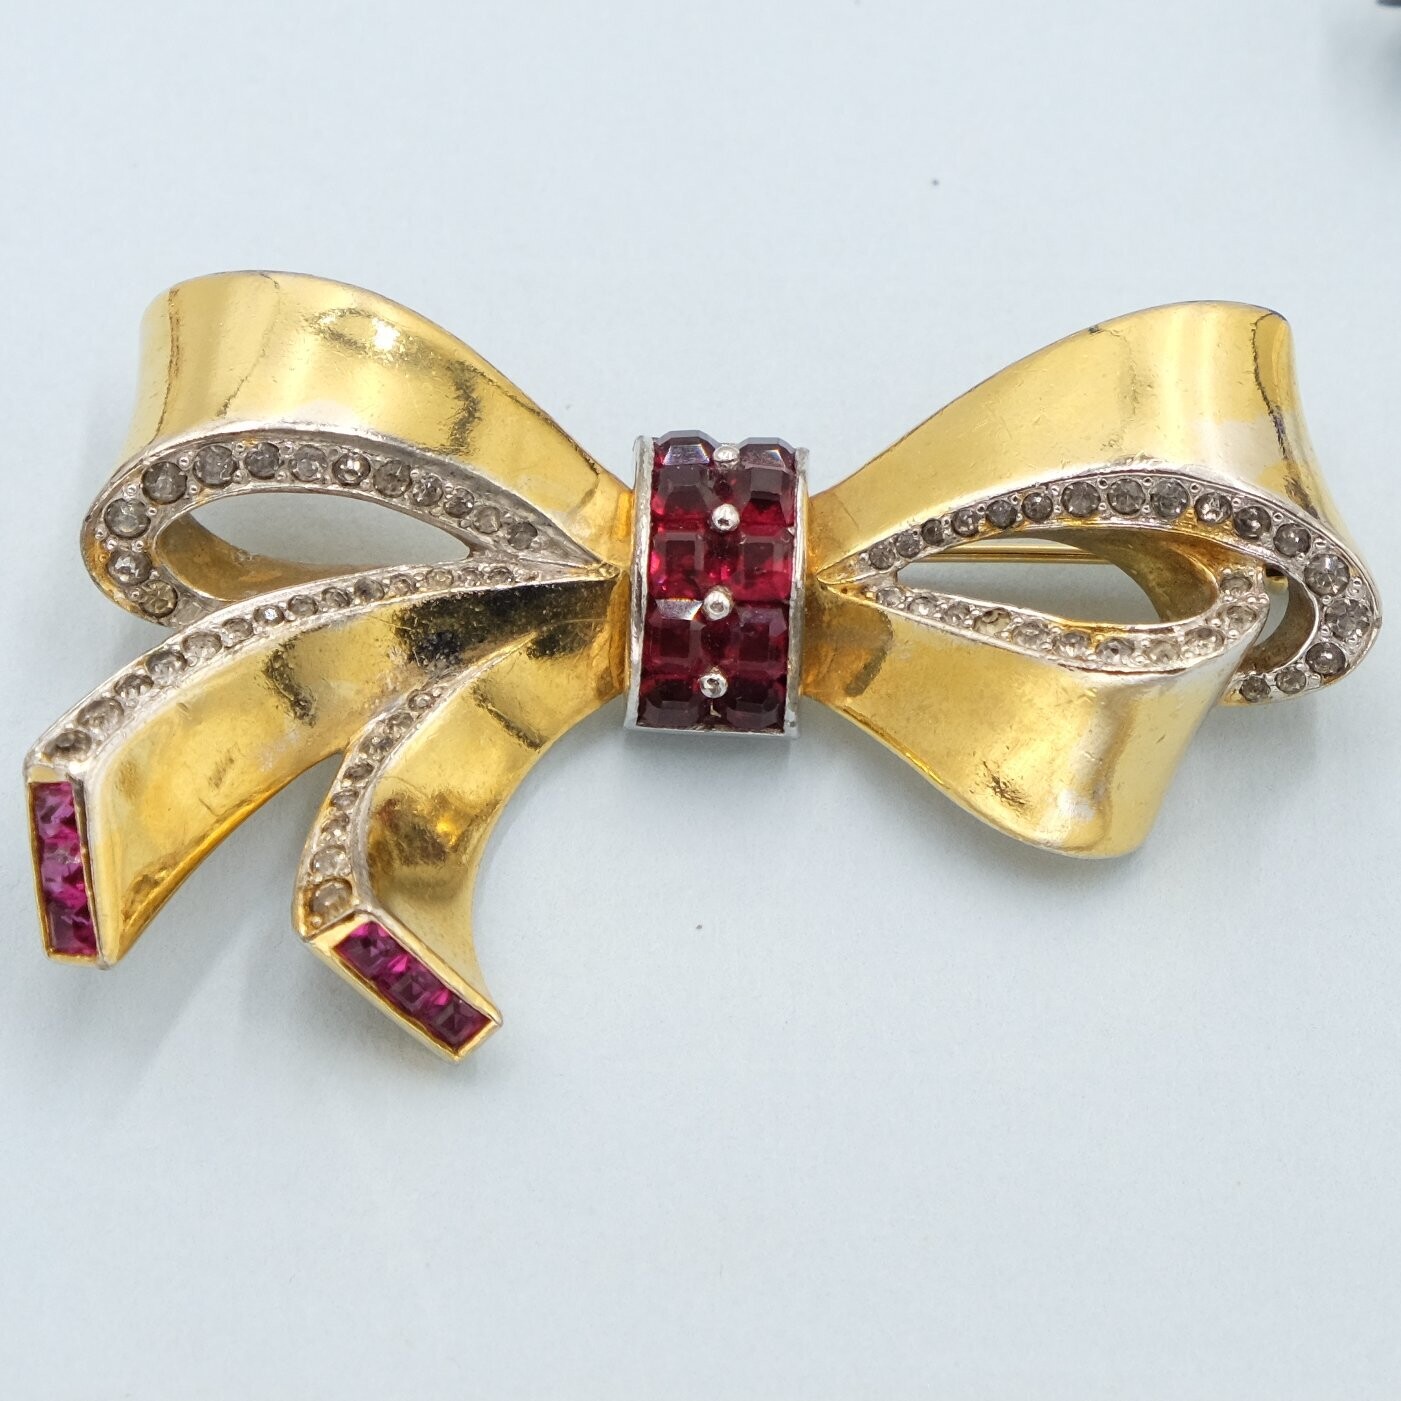 Vintage Marcel Boucher Bow Pin 1940's